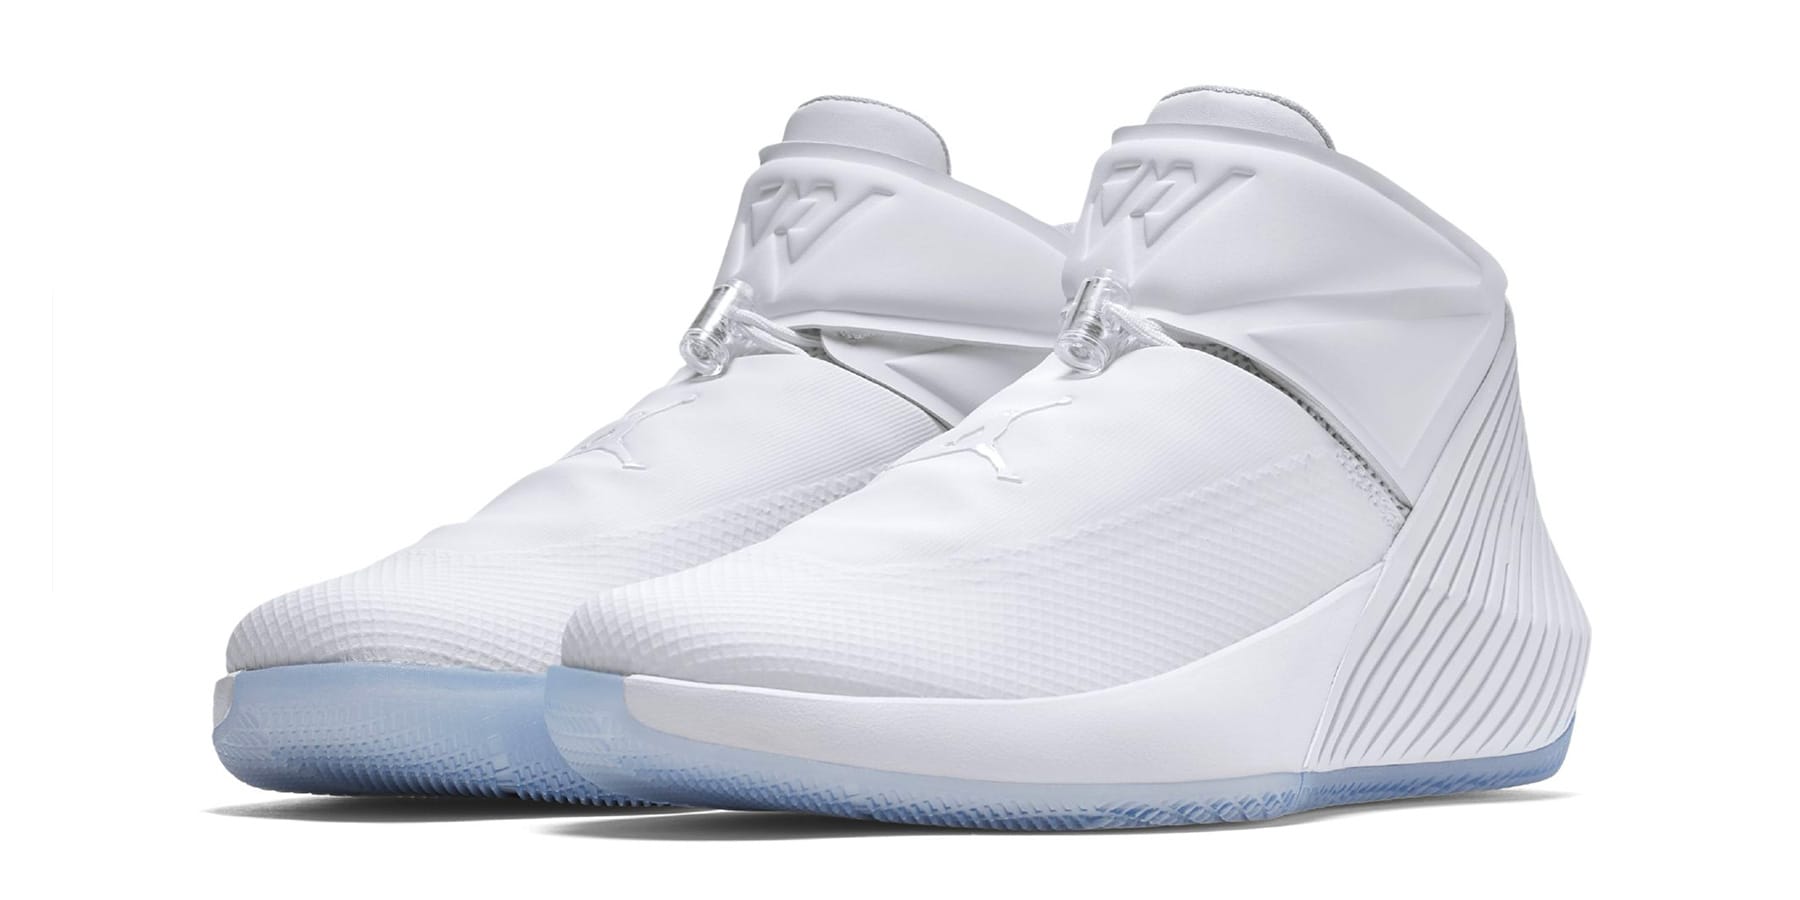 westbrook shoes all white